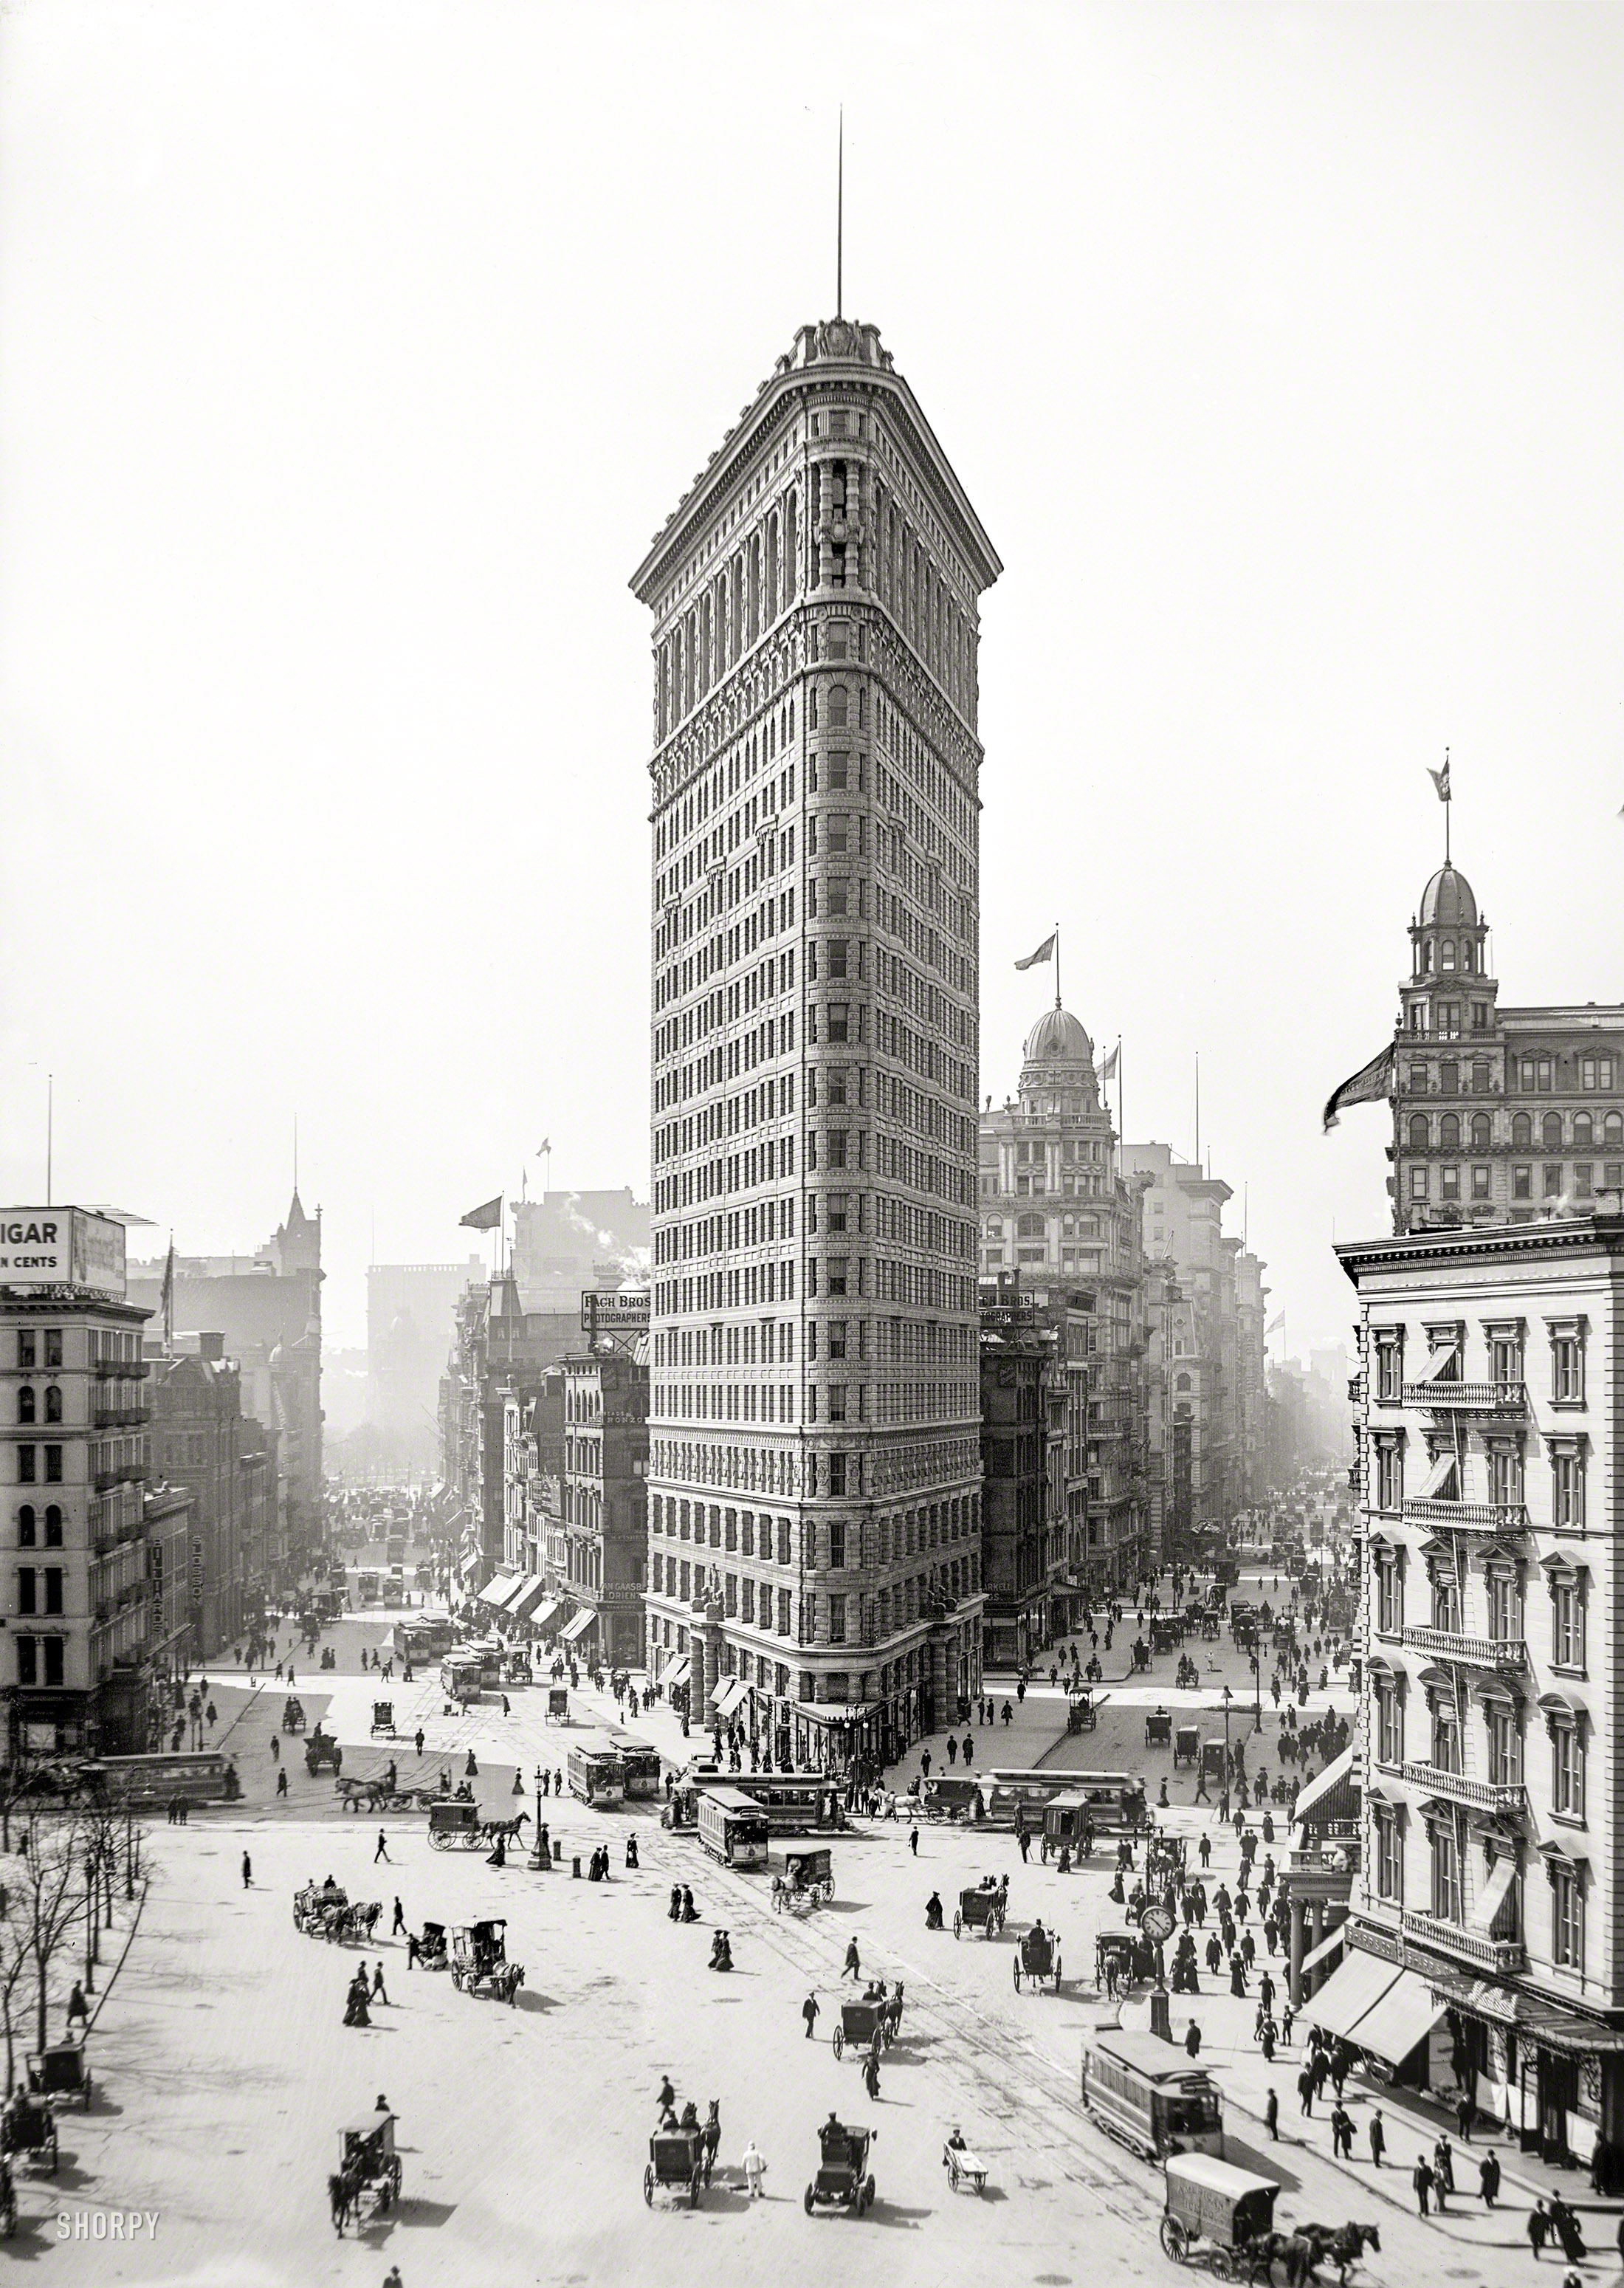 New York circa 1903. "The Flatiron Building." Where, as we like to say, there are three sides to every story. 8x10 inch glass negative. View full size.